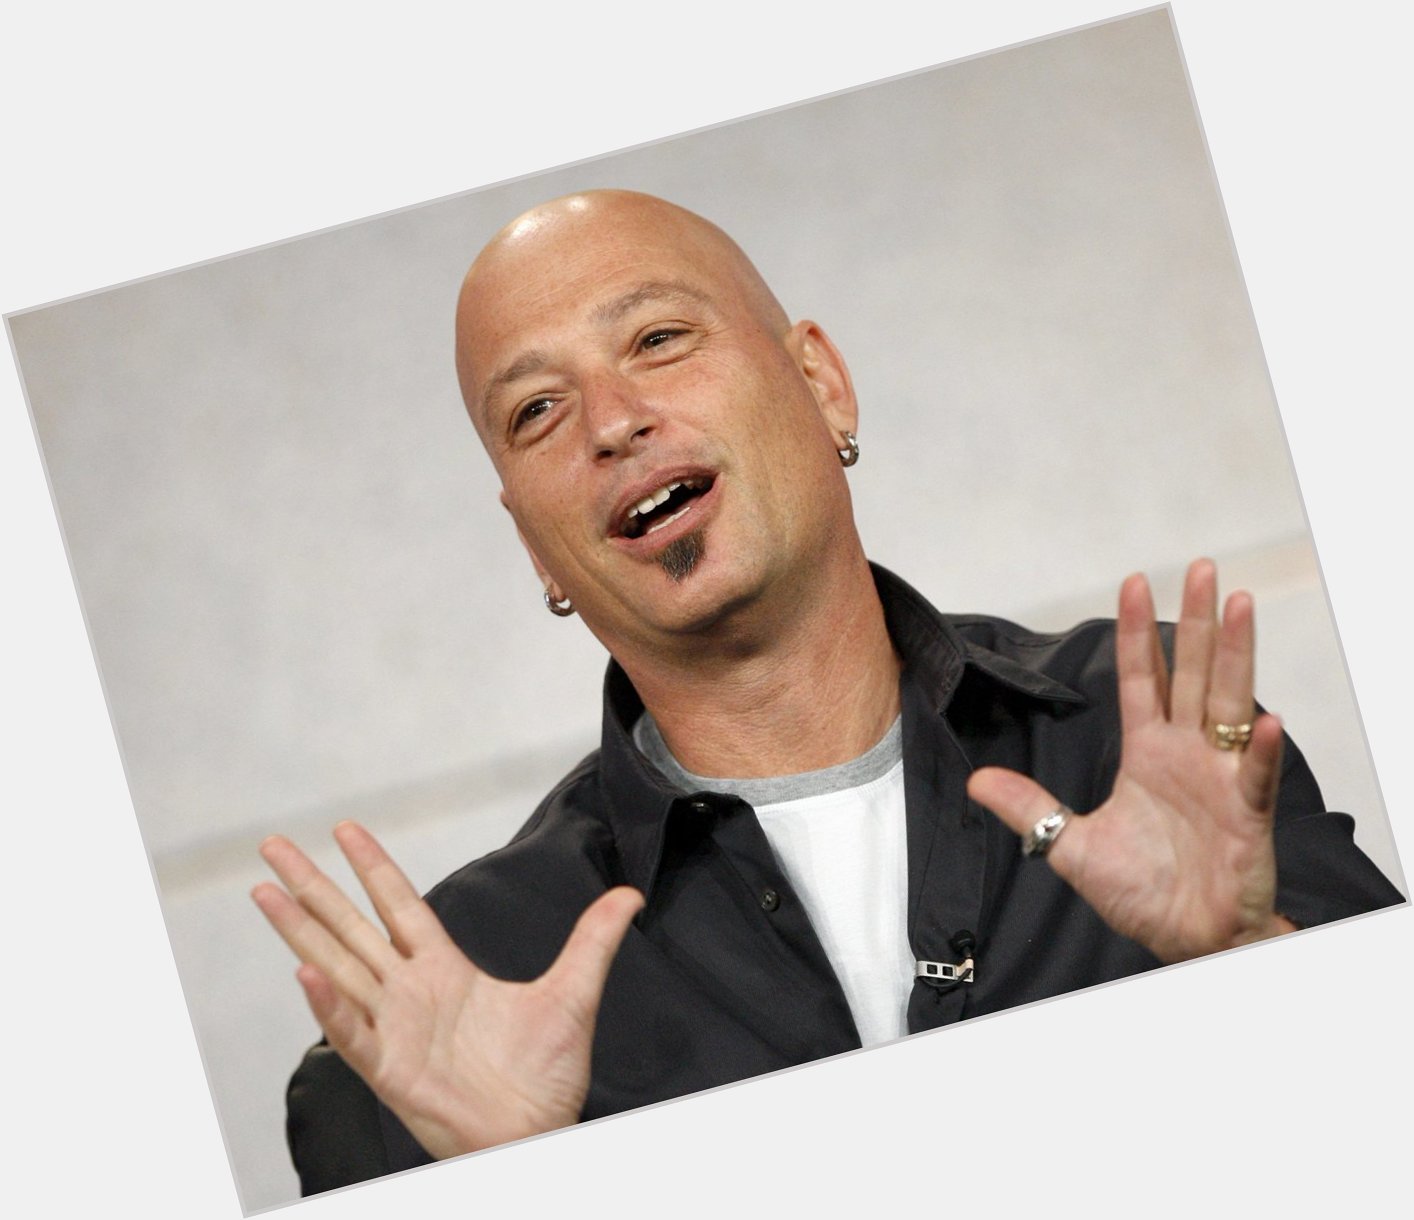 Happy Birthday to Howie Mandel, who turns 60 today! 